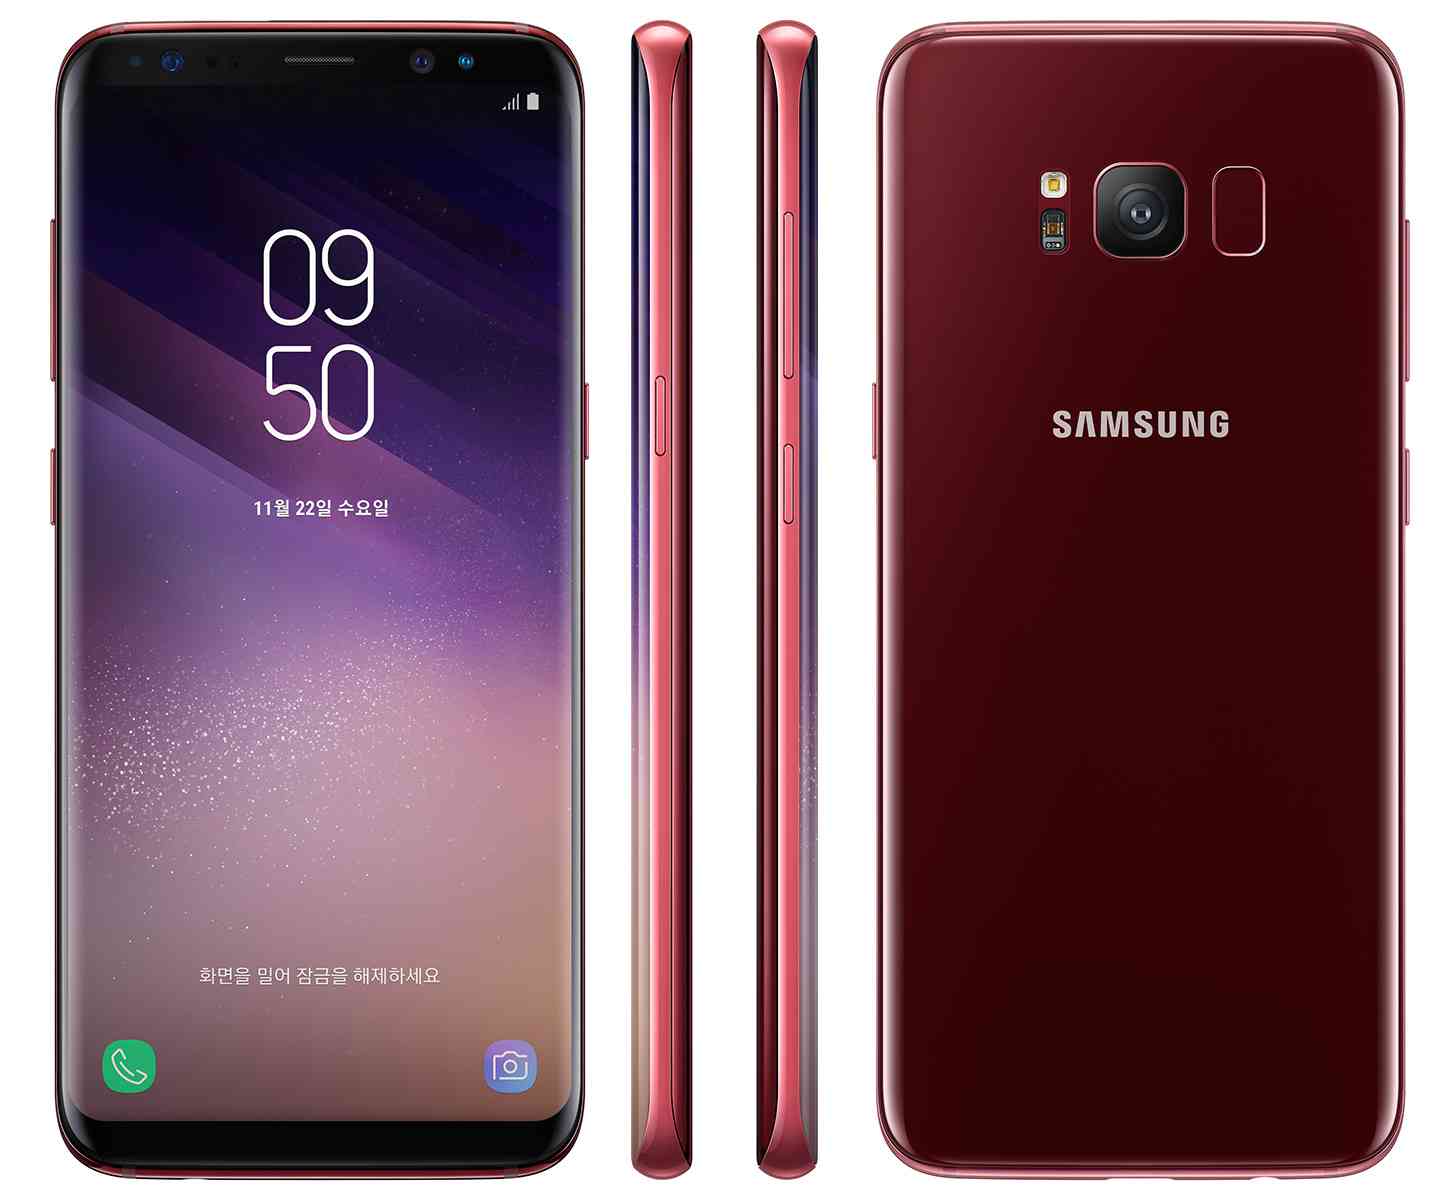 Samsung Galaxy S8 Burgundy Red official